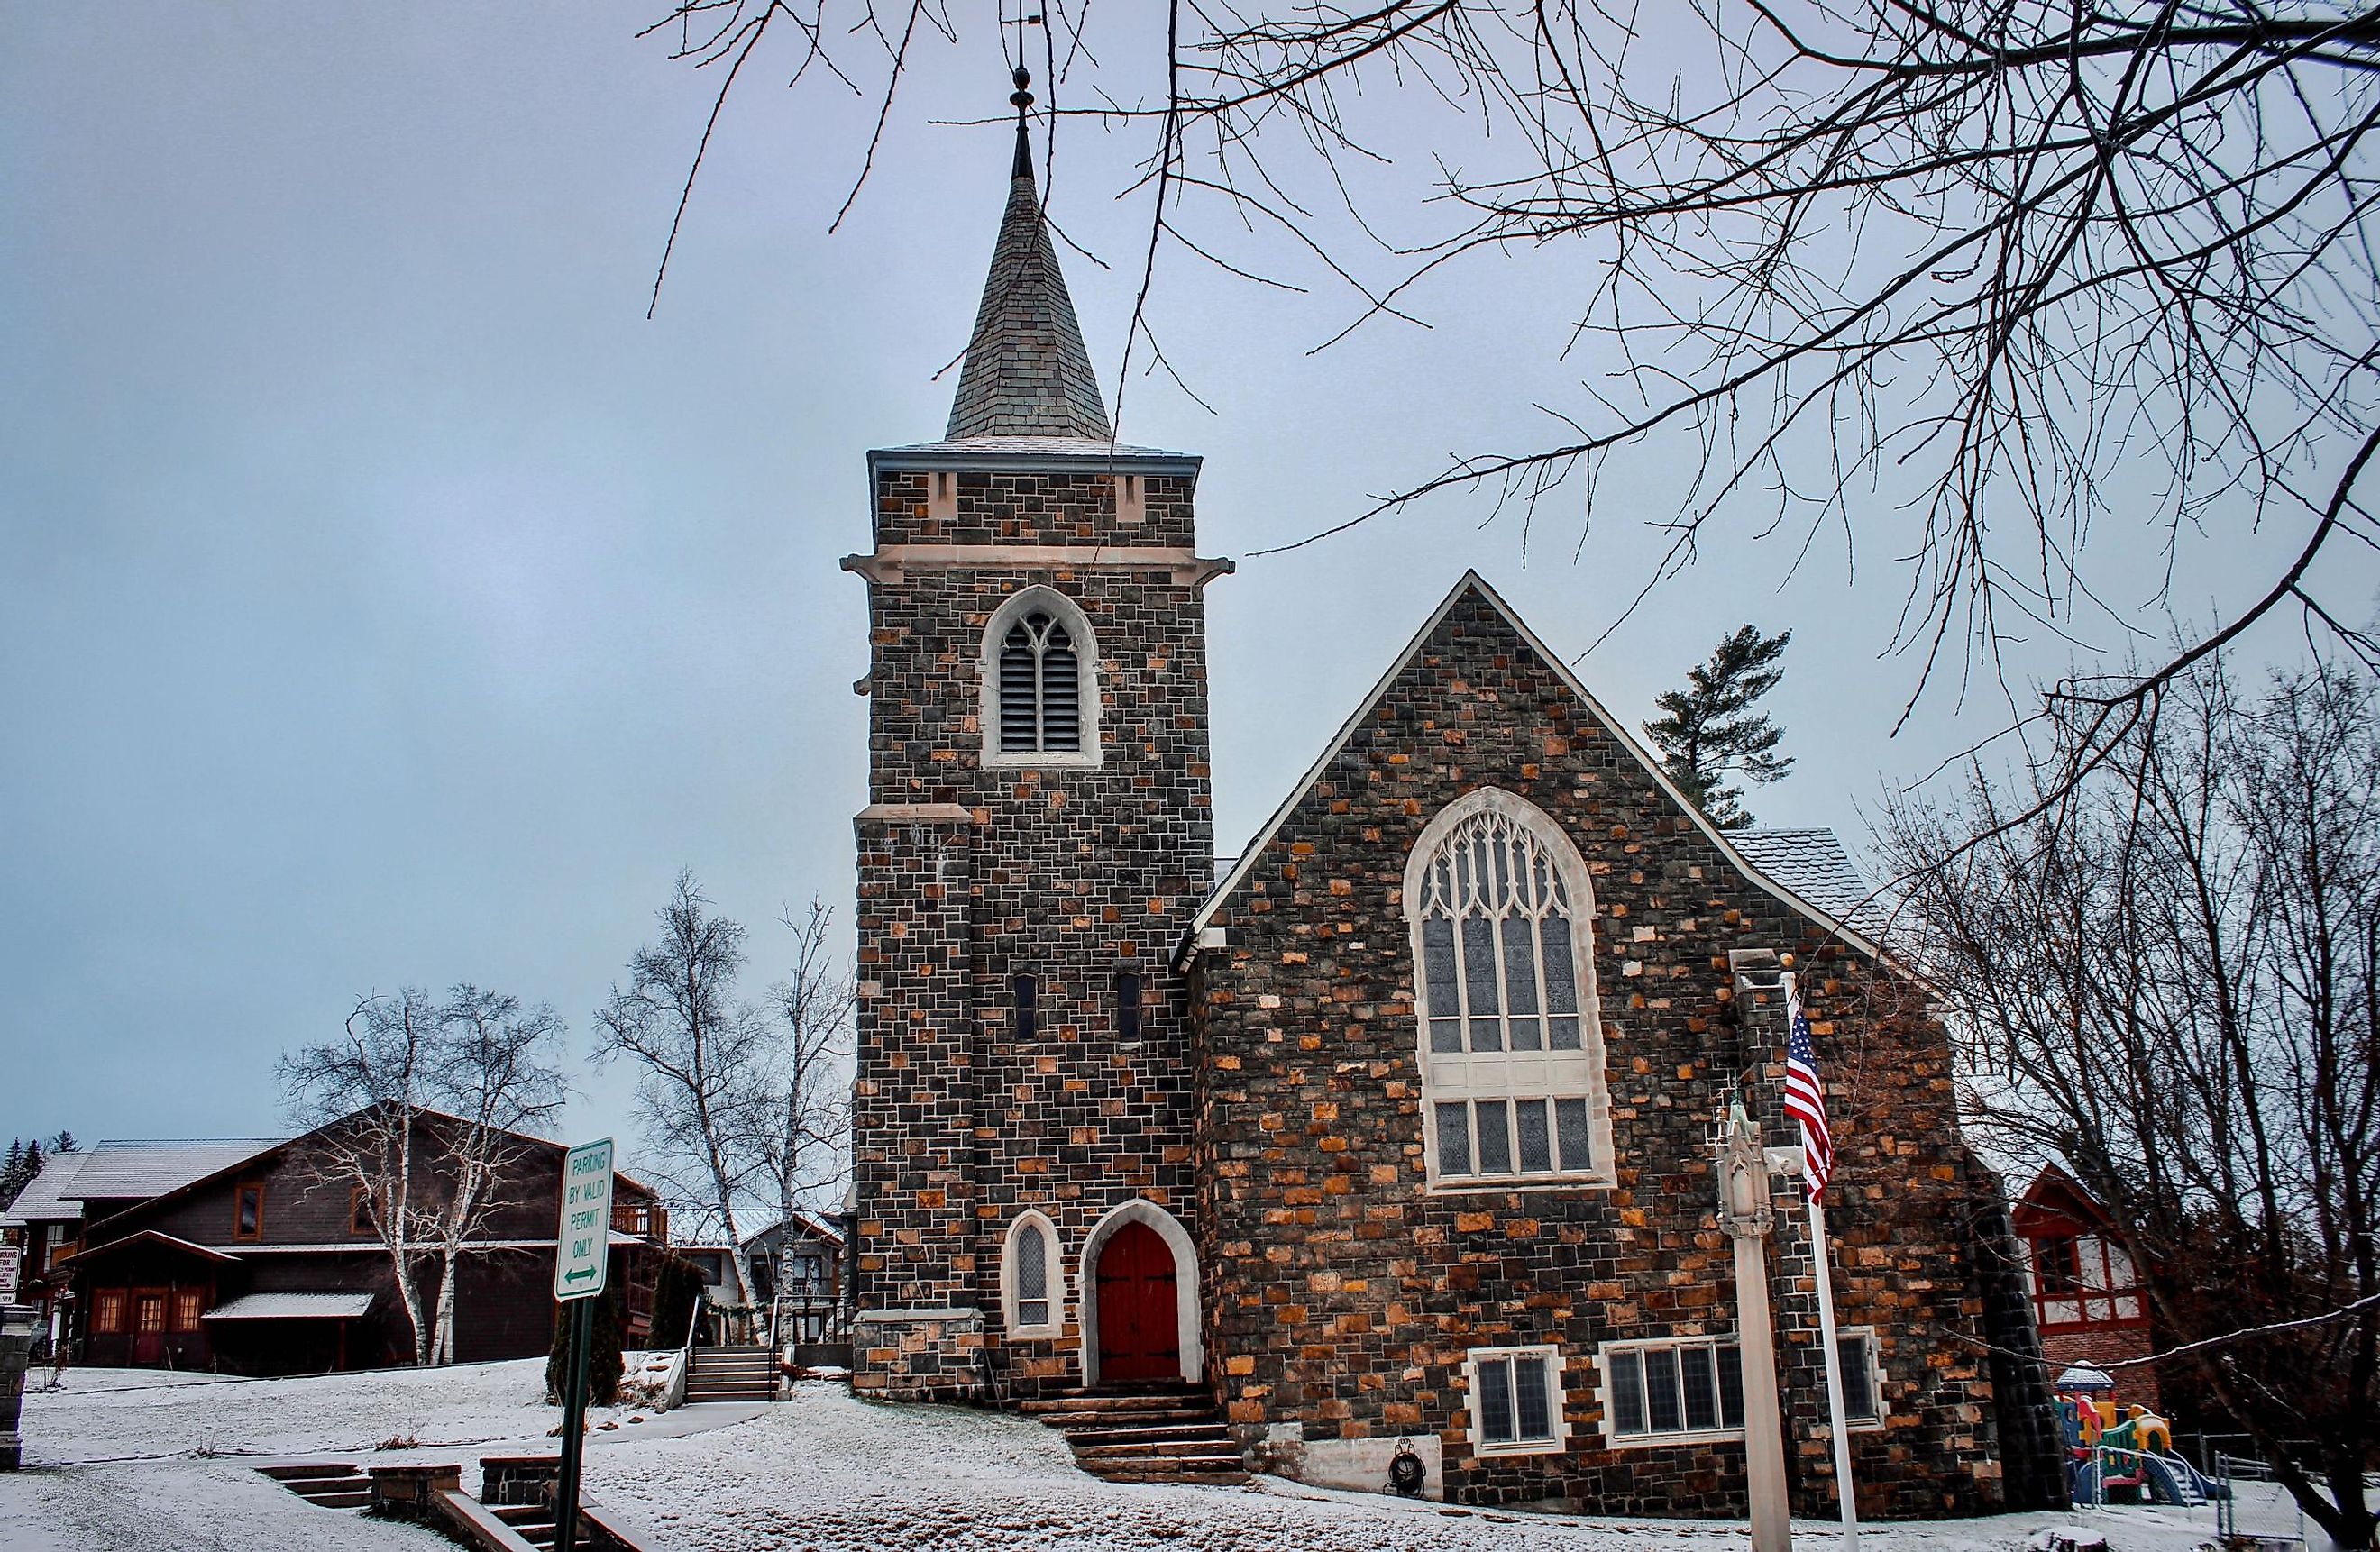 Adirondack Community Church, an ancient church on a snowy day in Winter in Lake Placid, New York